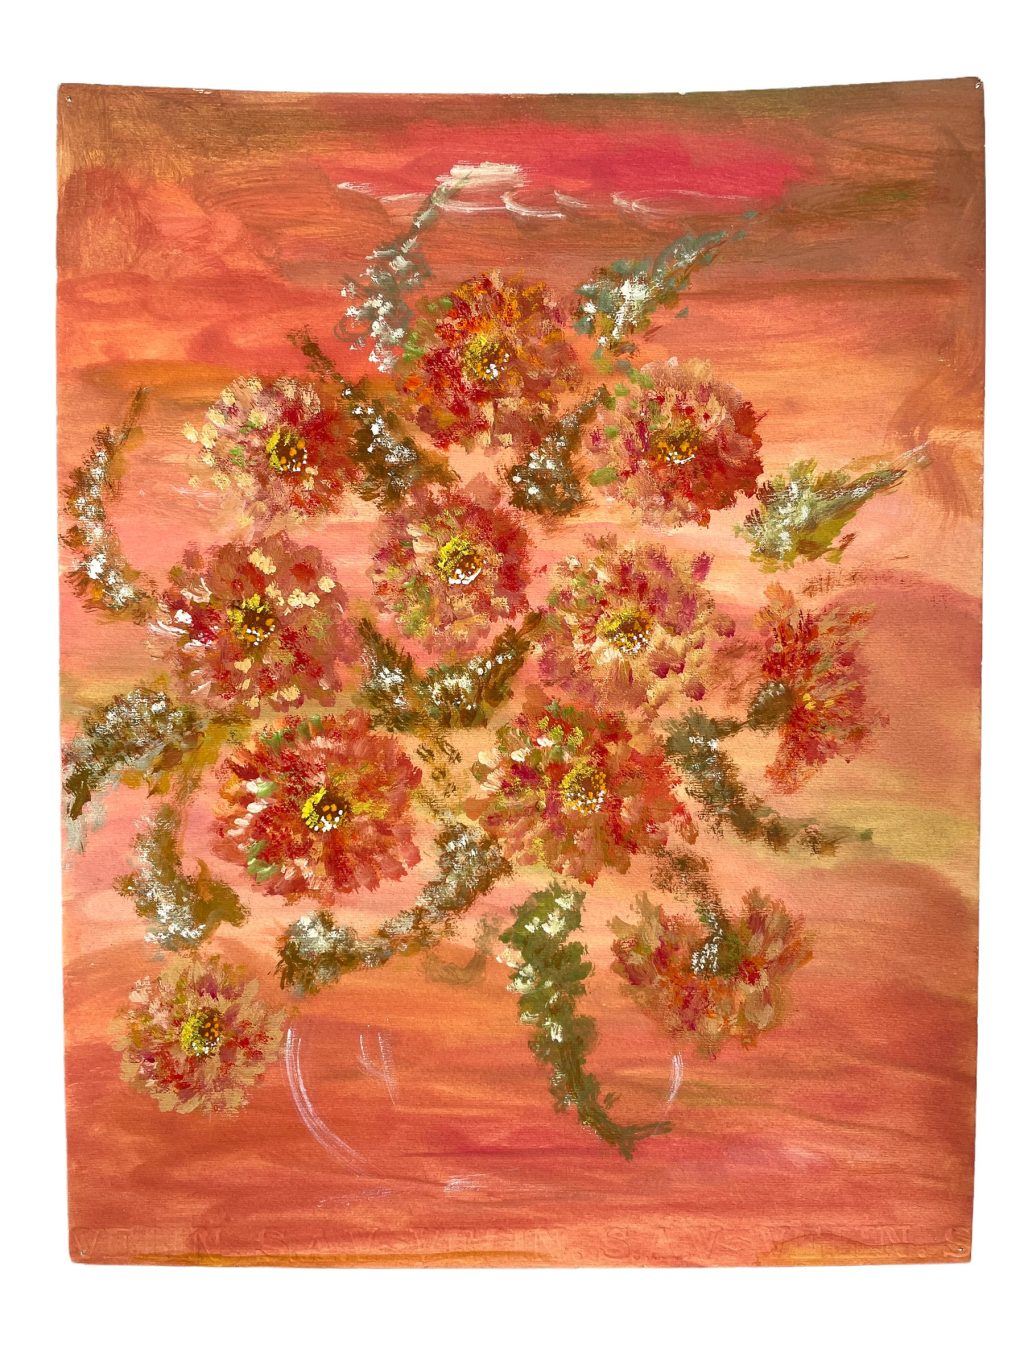 Vintage French Acrylic Painting Of Flowers On Paper Naive Style Wall Decor By Josiane Pasquier c1960-70’s / EVE